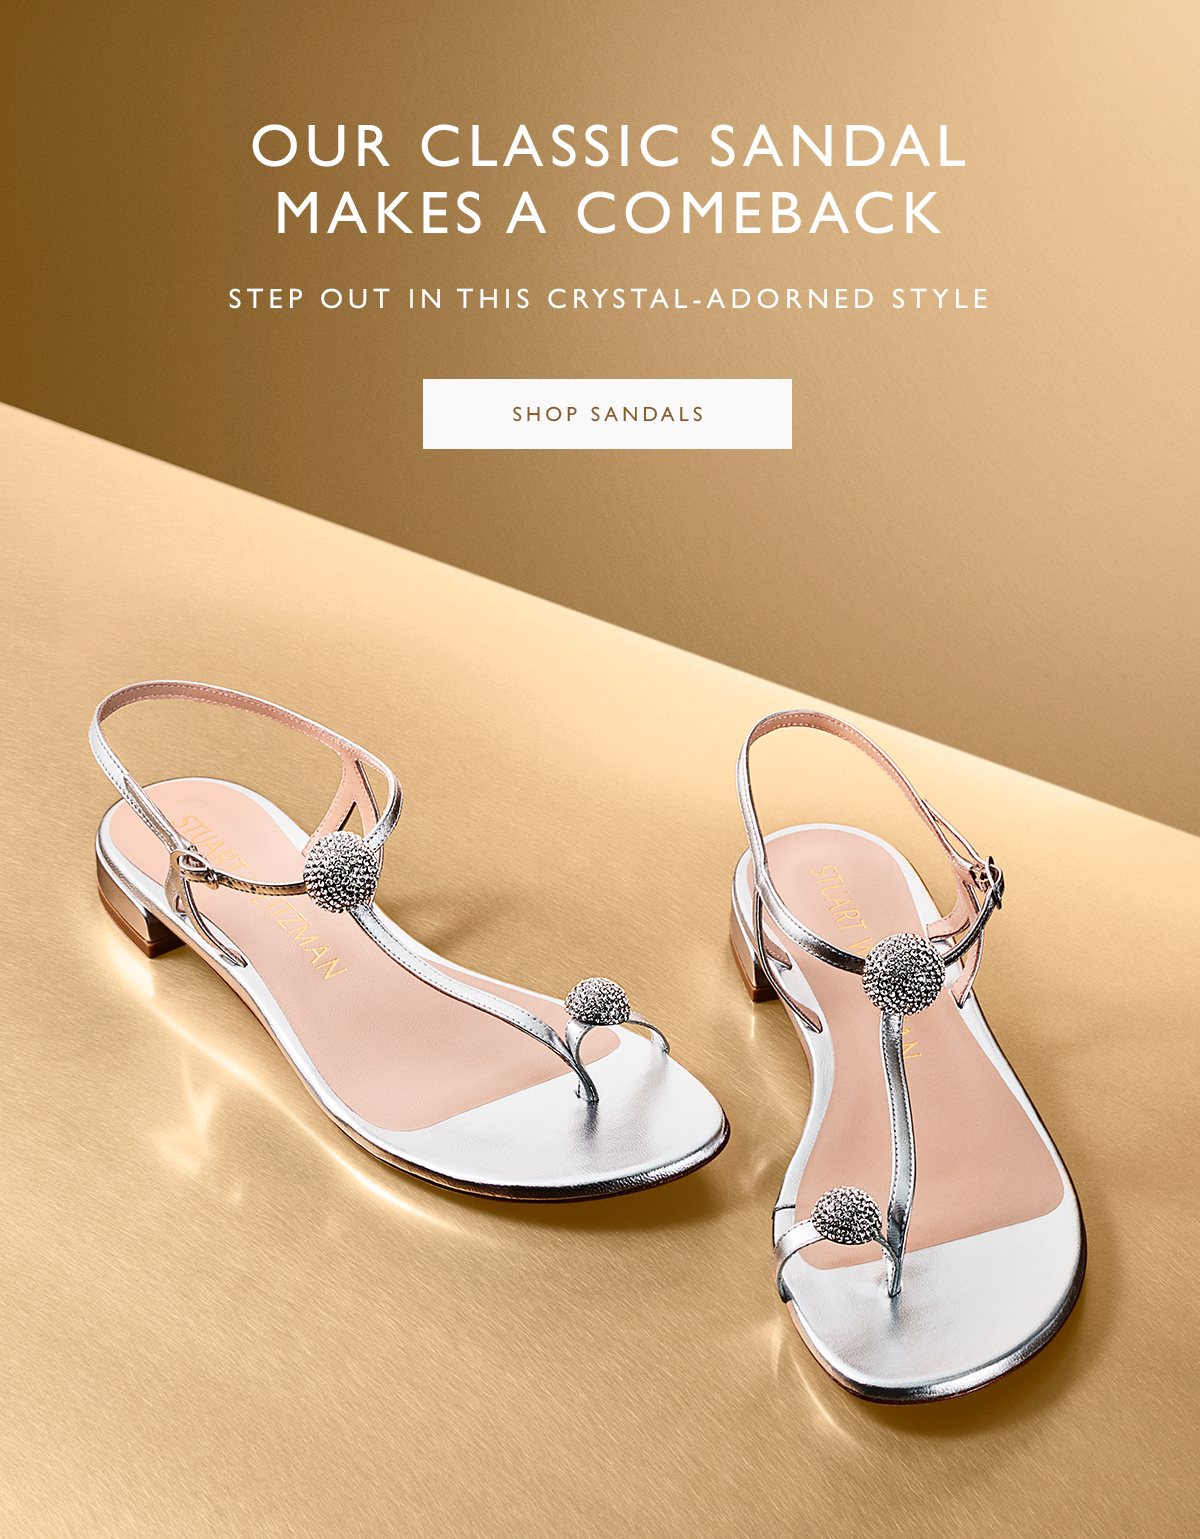 Our Classic Sandal Makes a Comeback. Step out in this crystal-adorned style. SHOP SANDALS